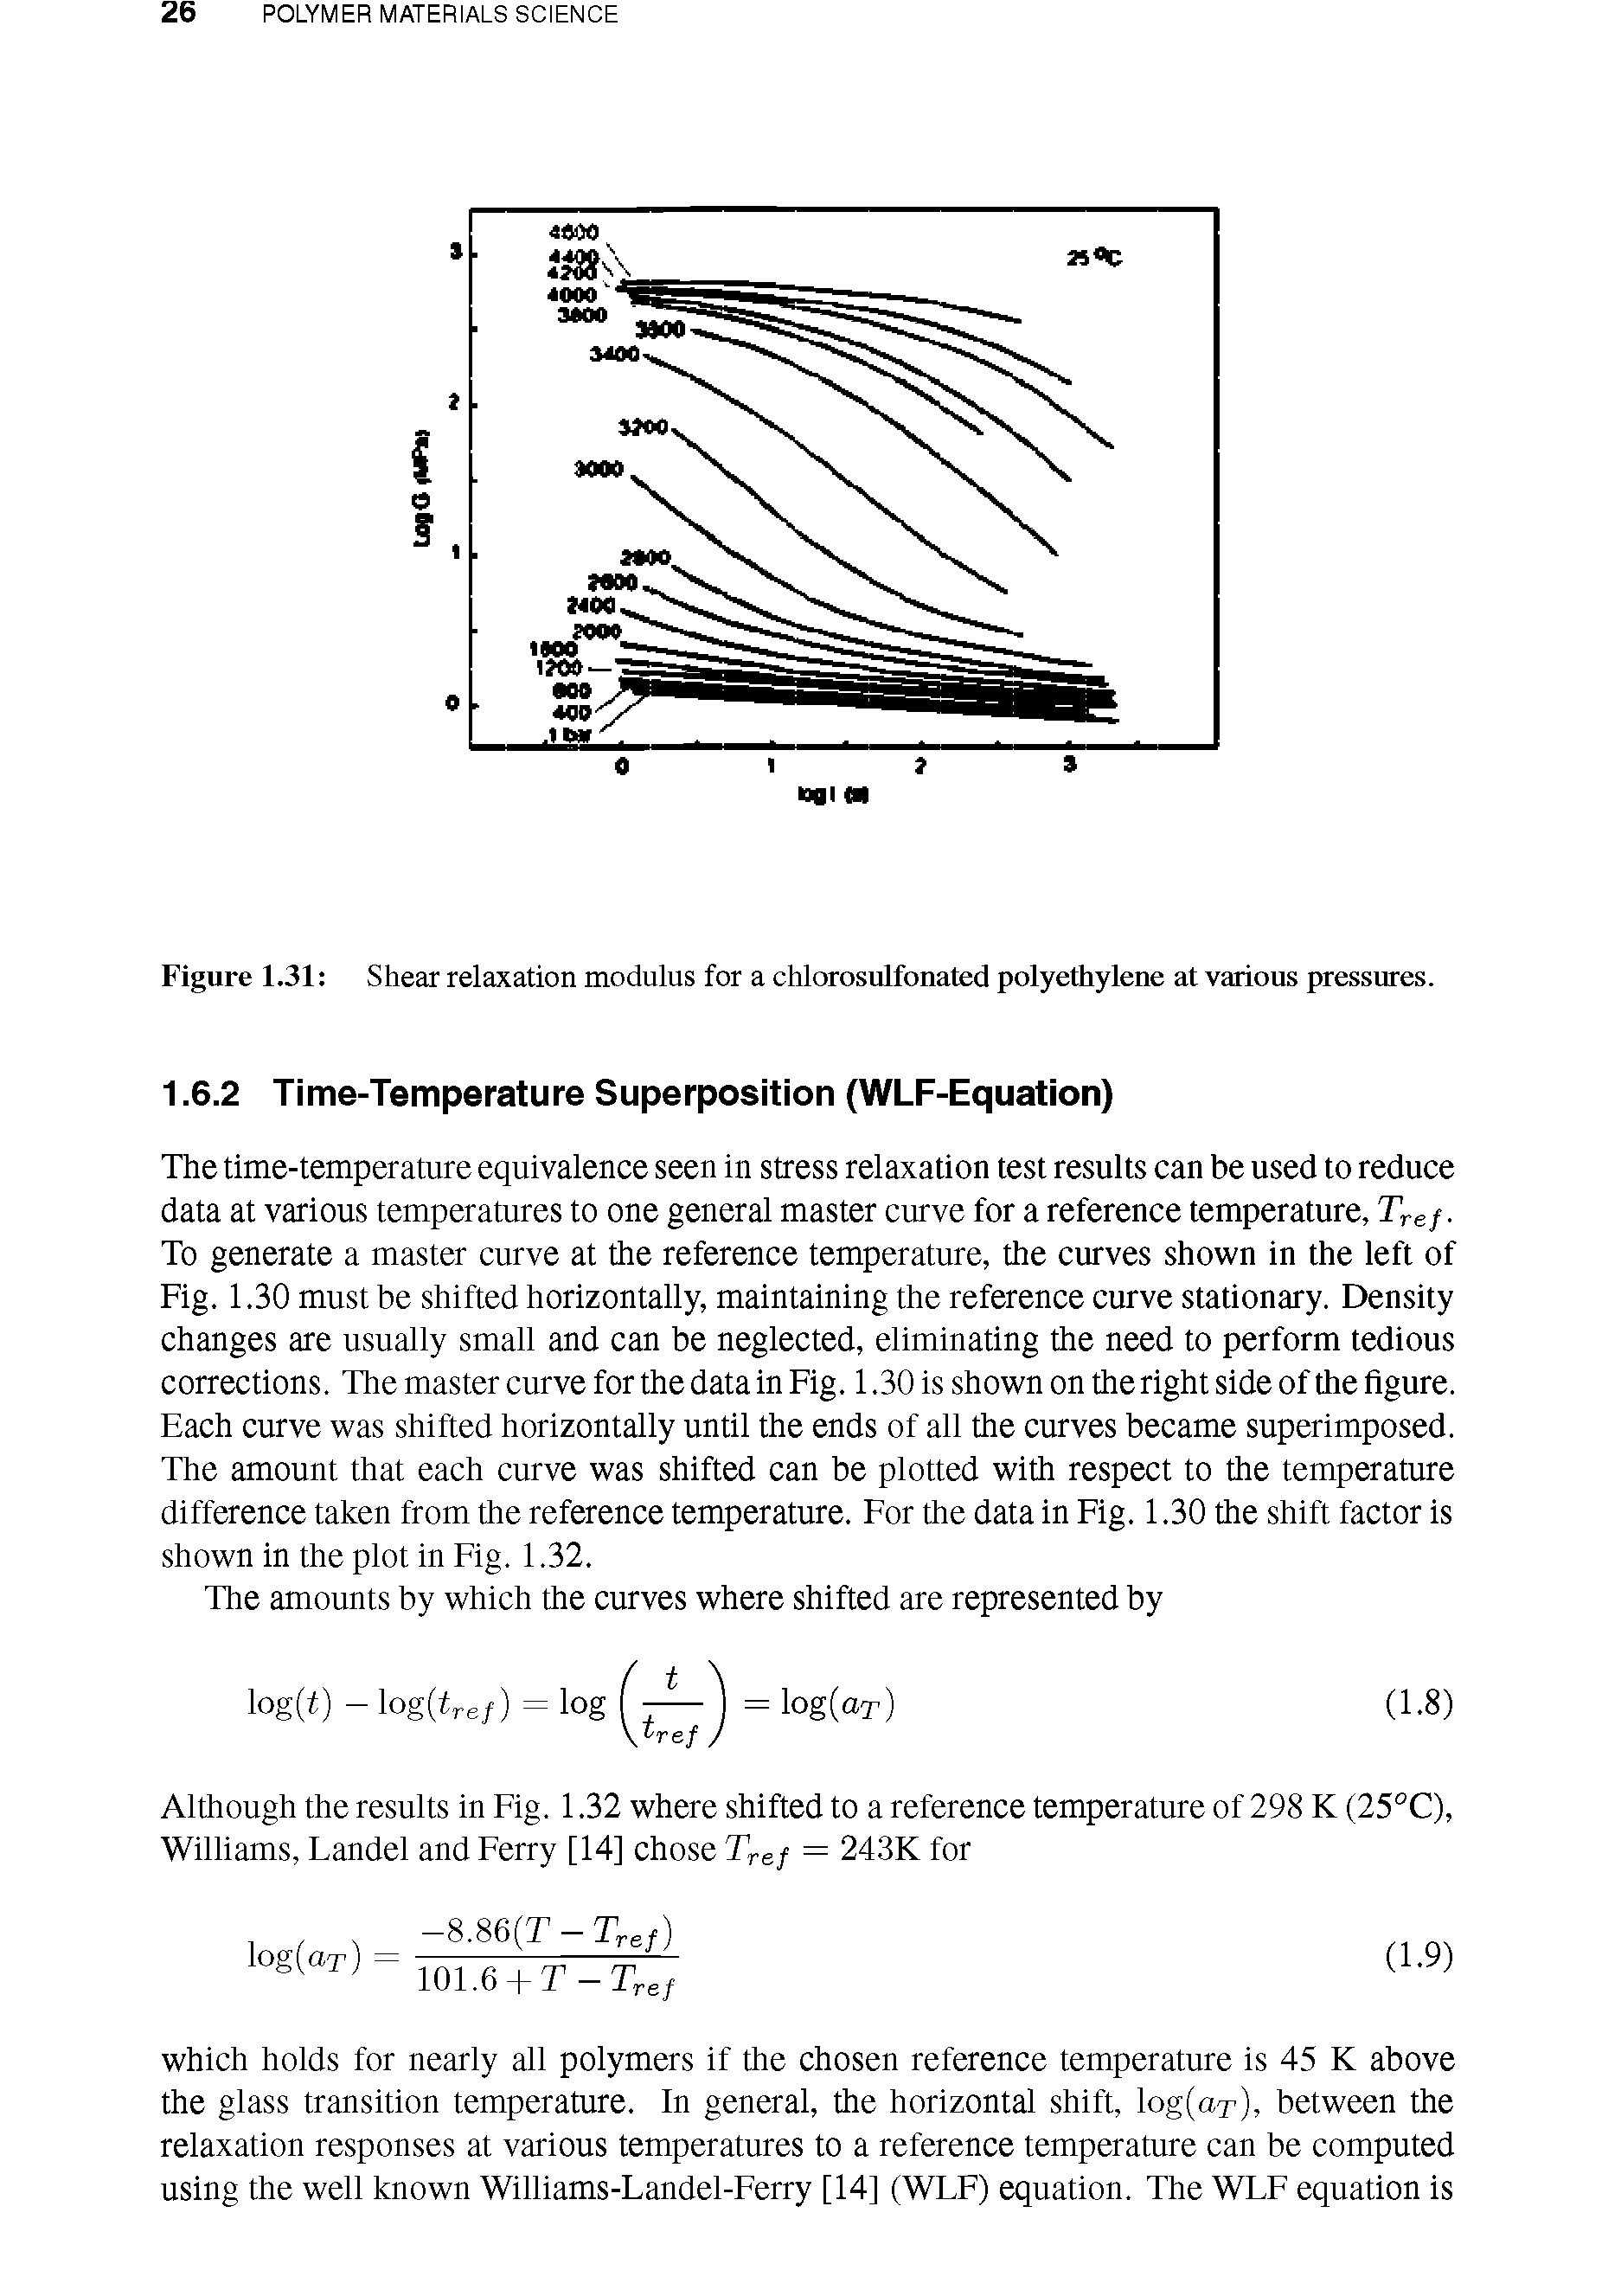 Figure 1.31 Shear relaxation modulus for a chlorosulfonated polyethylene at various pressures.